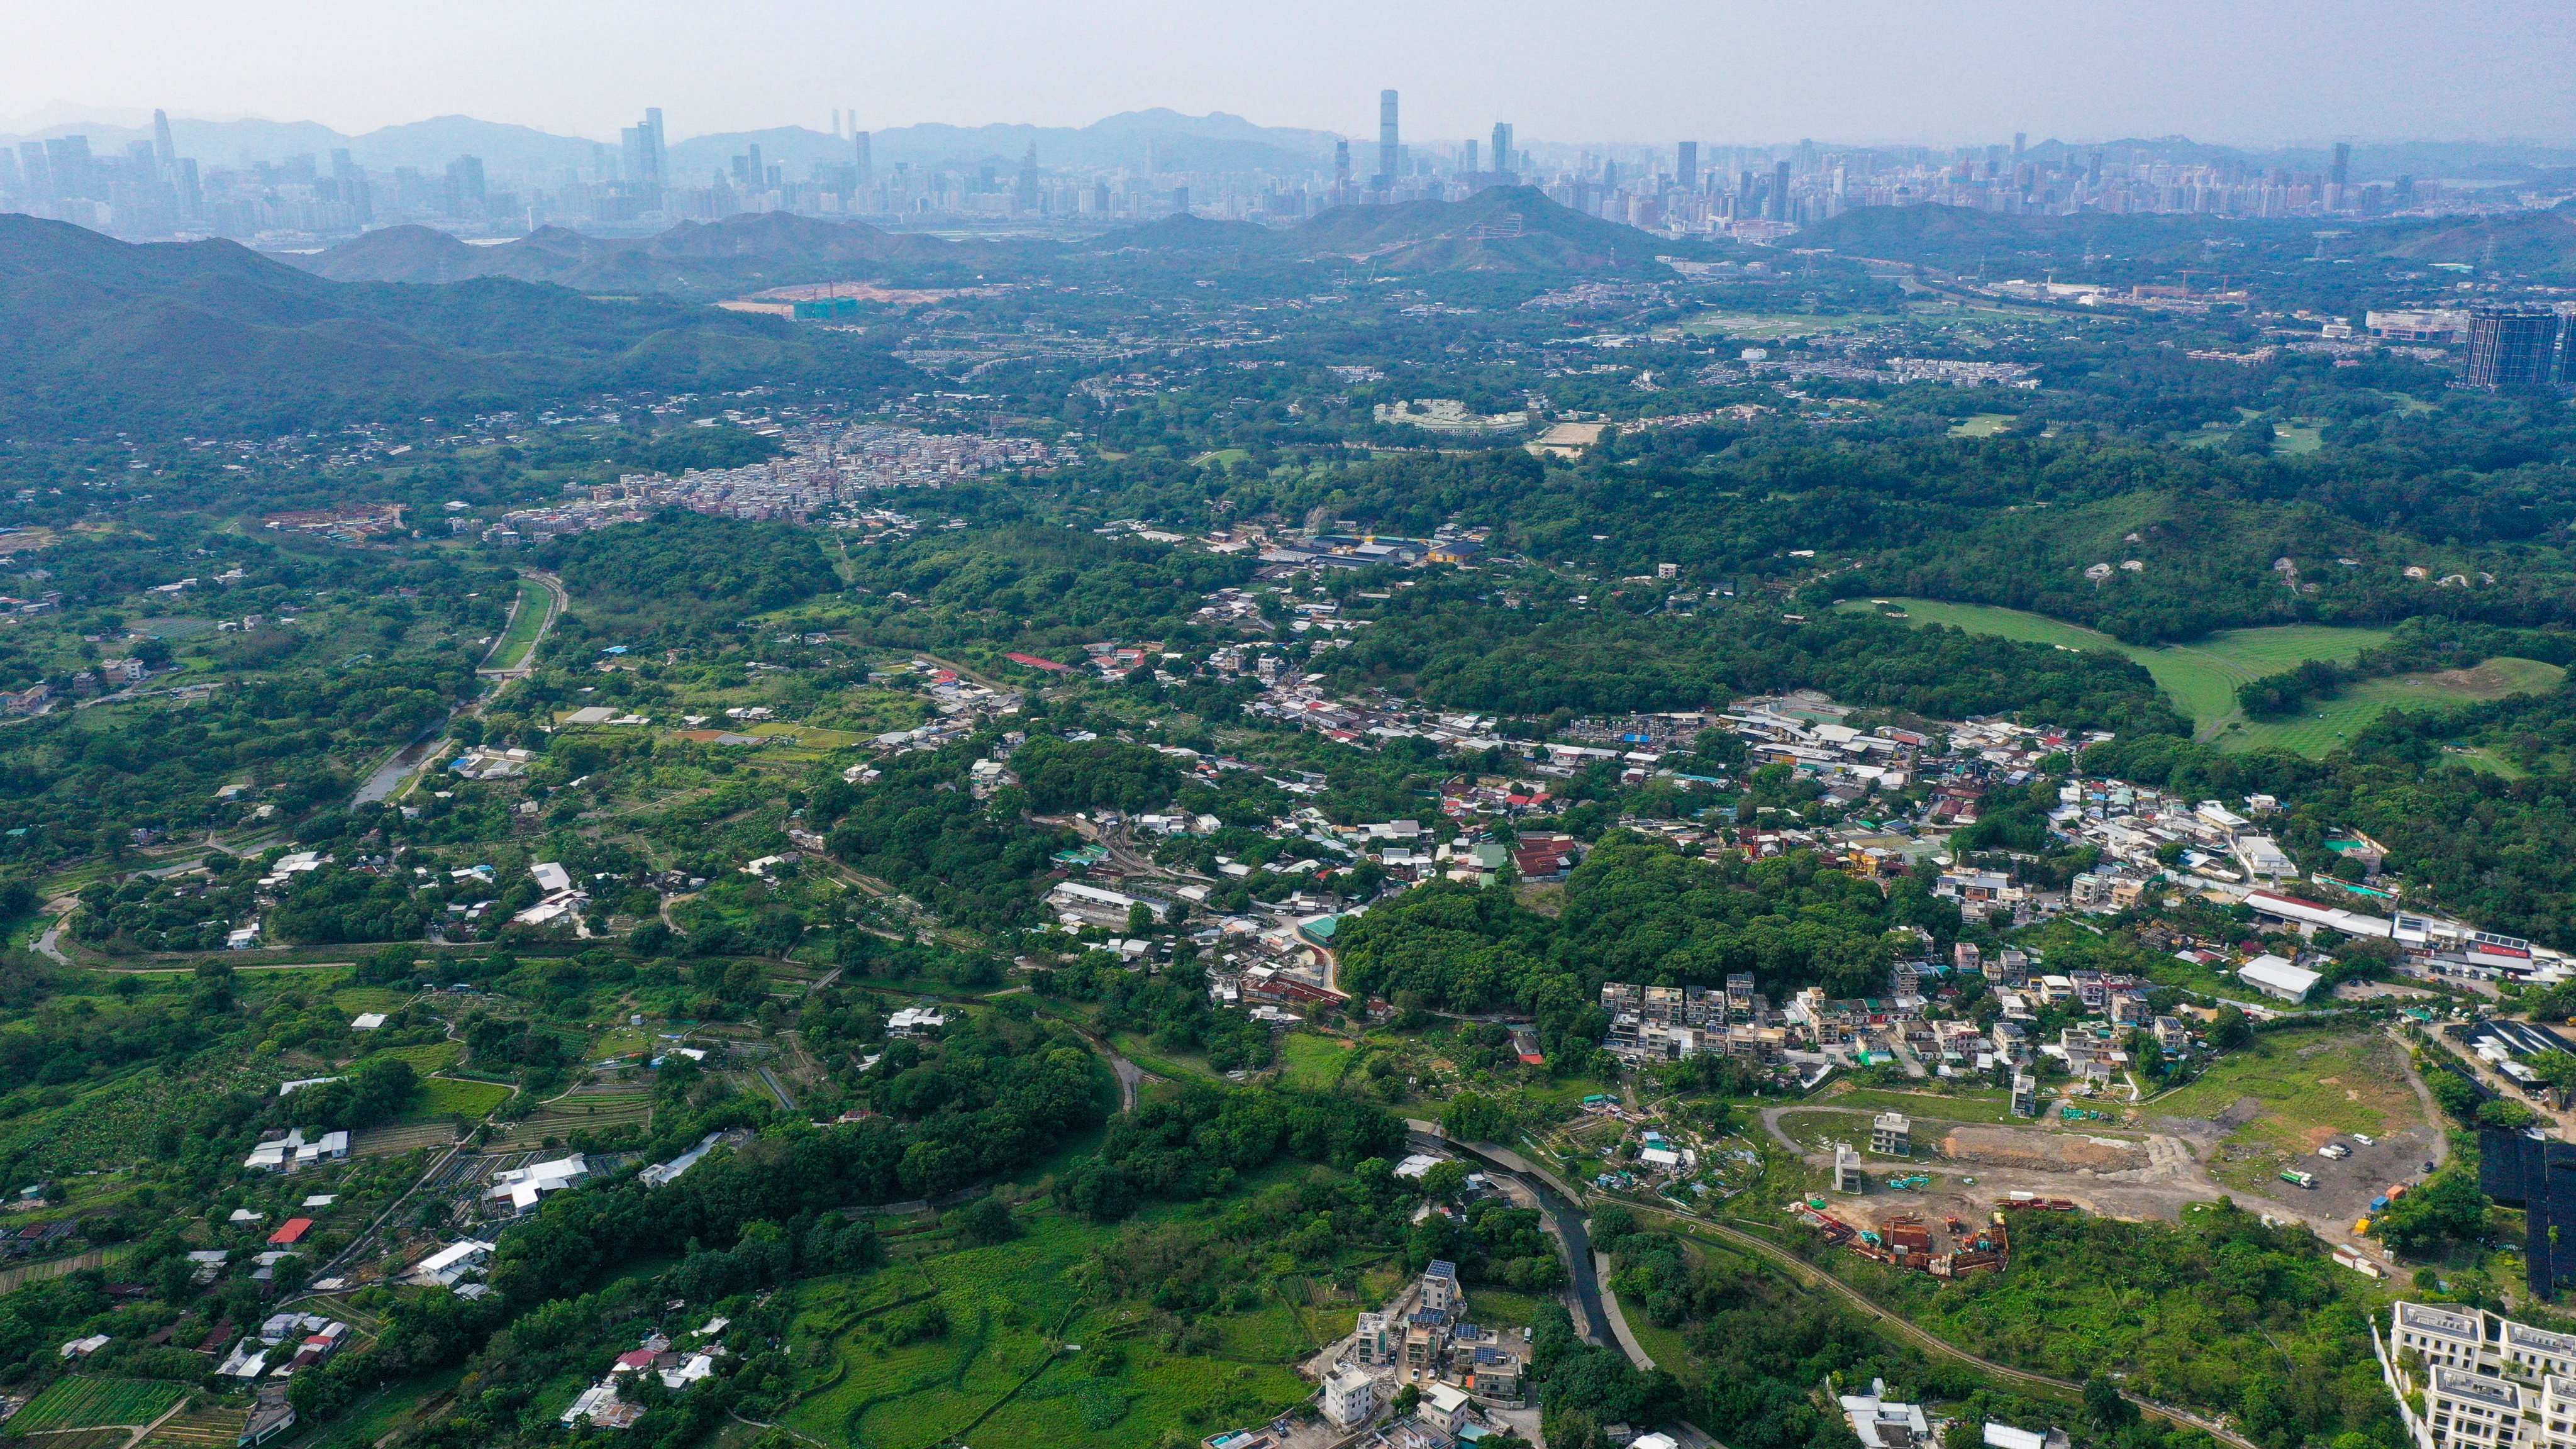 The Kwu Tung area in the northern New Territories. The Northern Metropolis project is expected to provide 500,000 flats for 2.5 million residents and establish a new commercial area along the border. Photo: May Tse